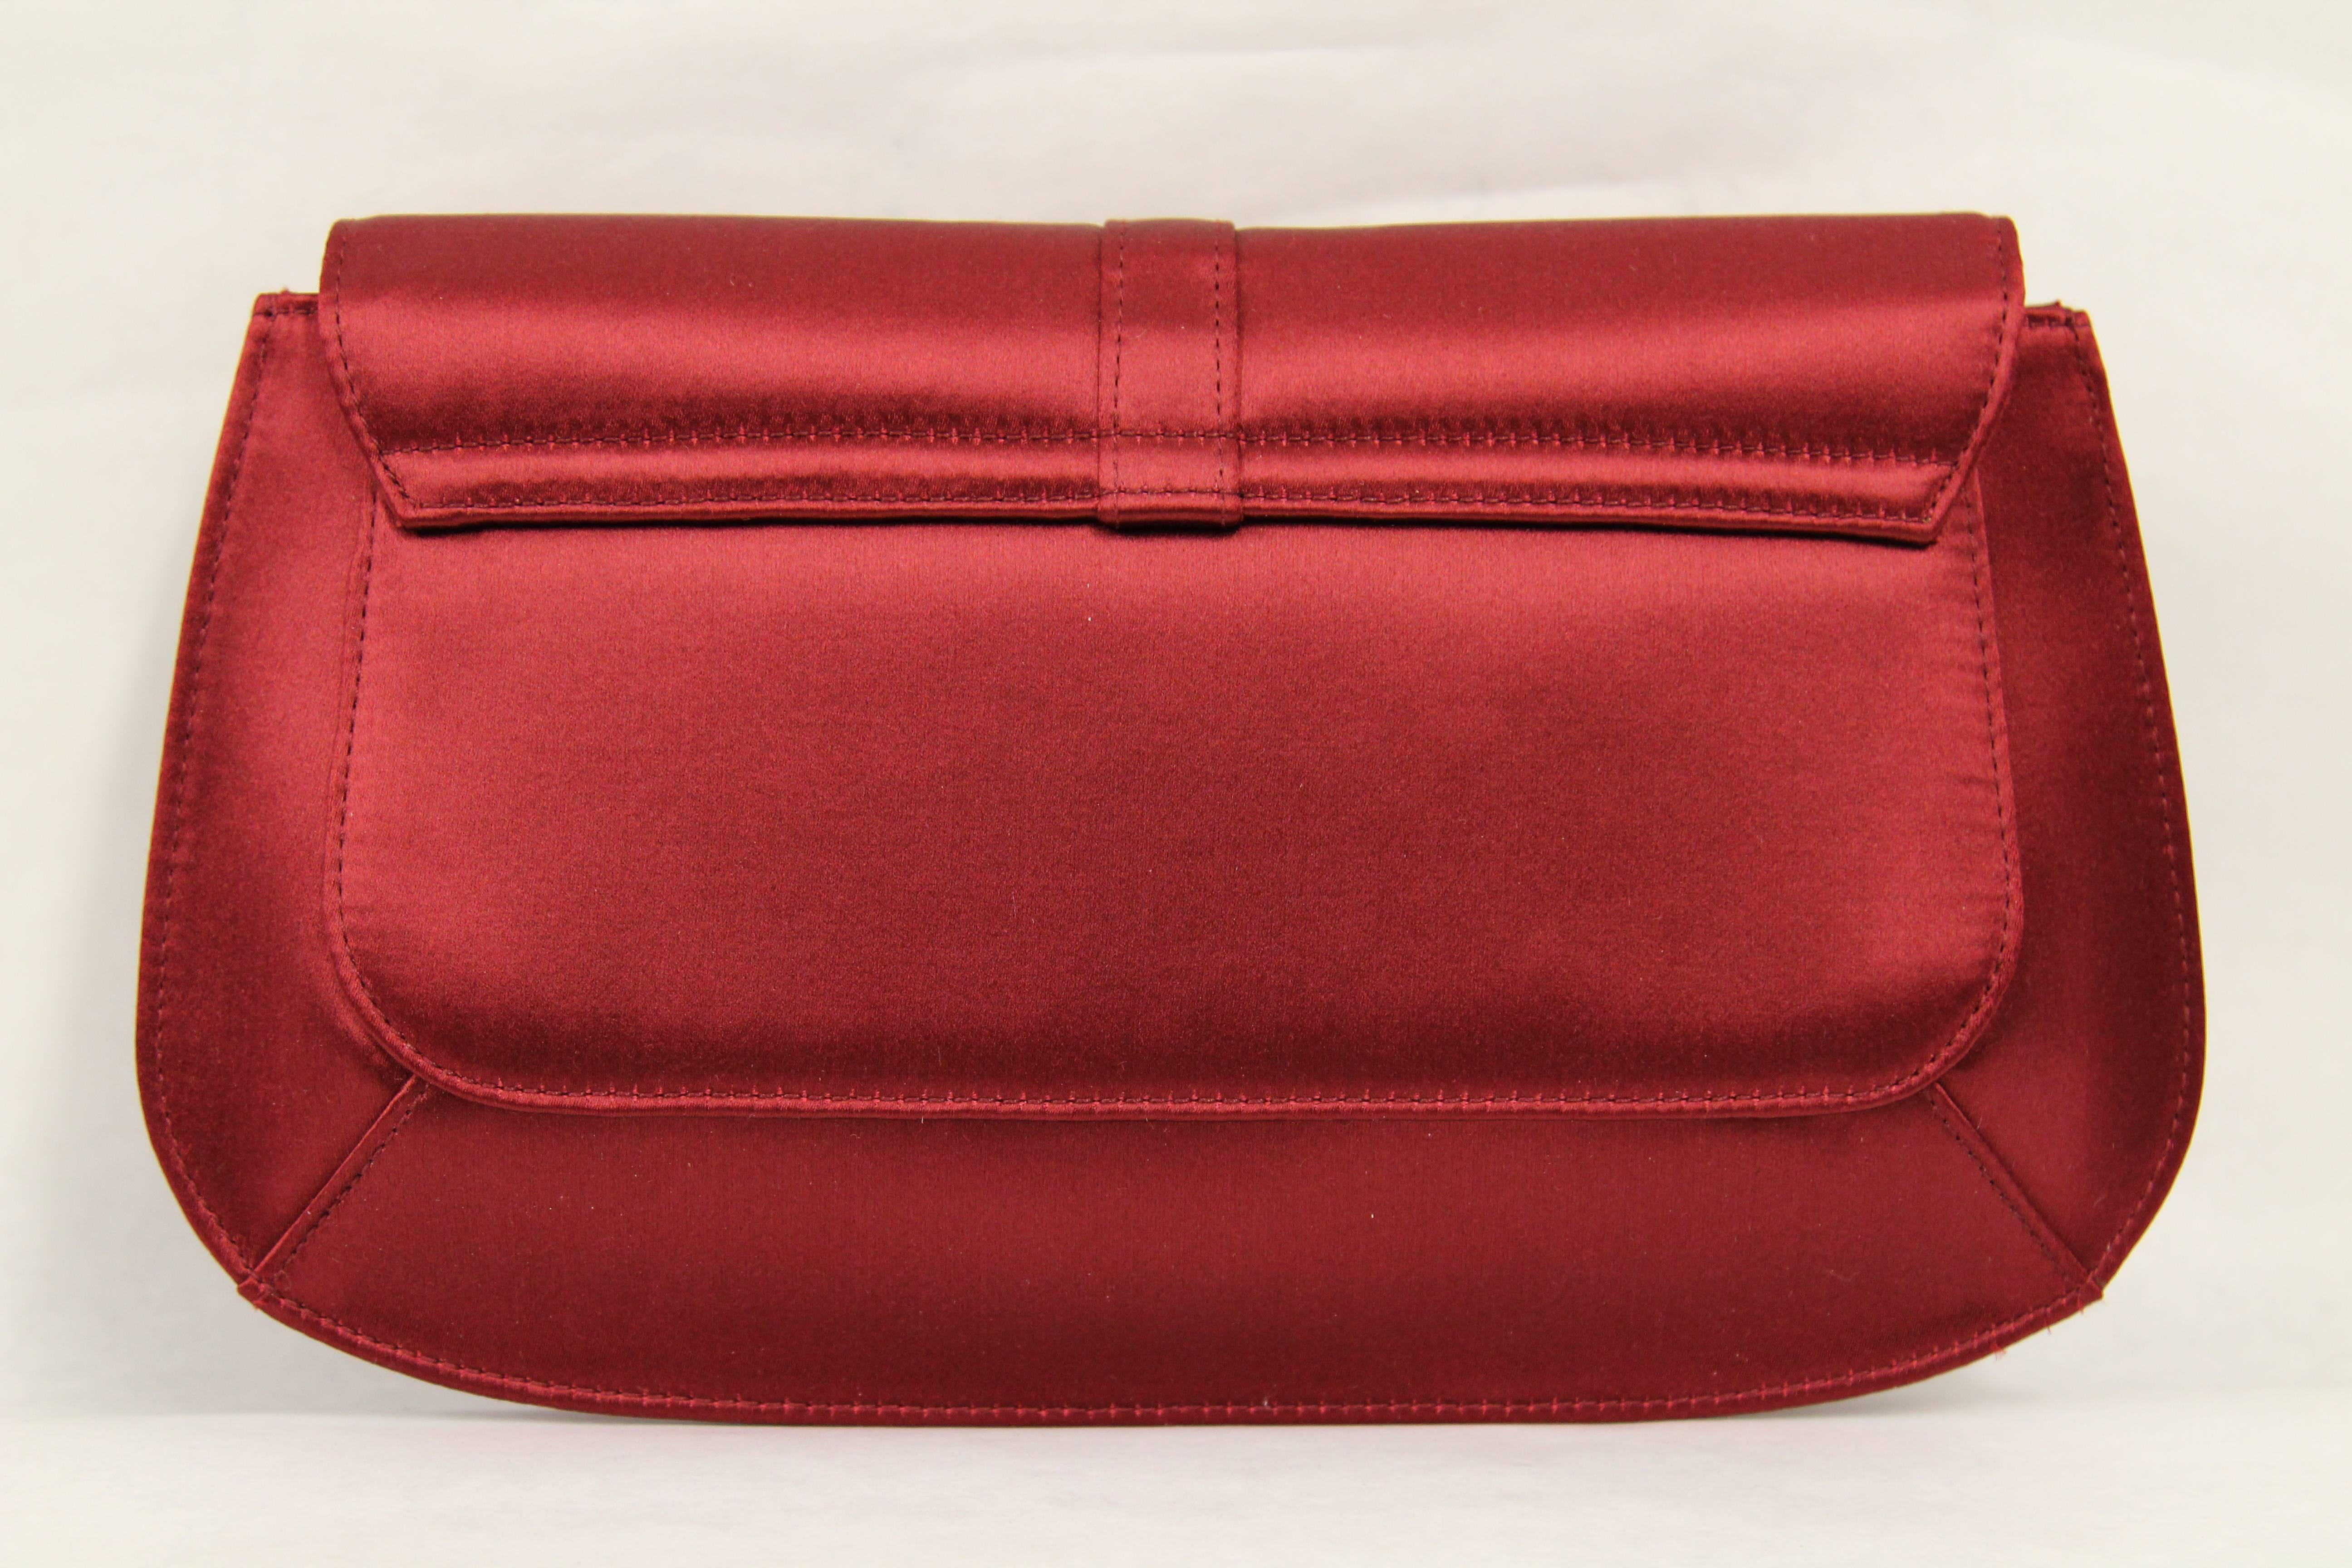 Lovely Yves Saint Laurent Rive Gauche satin silk clutch, featuring a small internal pocket.
The bag comes with the certificate of authenticity.
Excellent conditions. 

Measurements: 24 cm x 15 cm x 2 cm